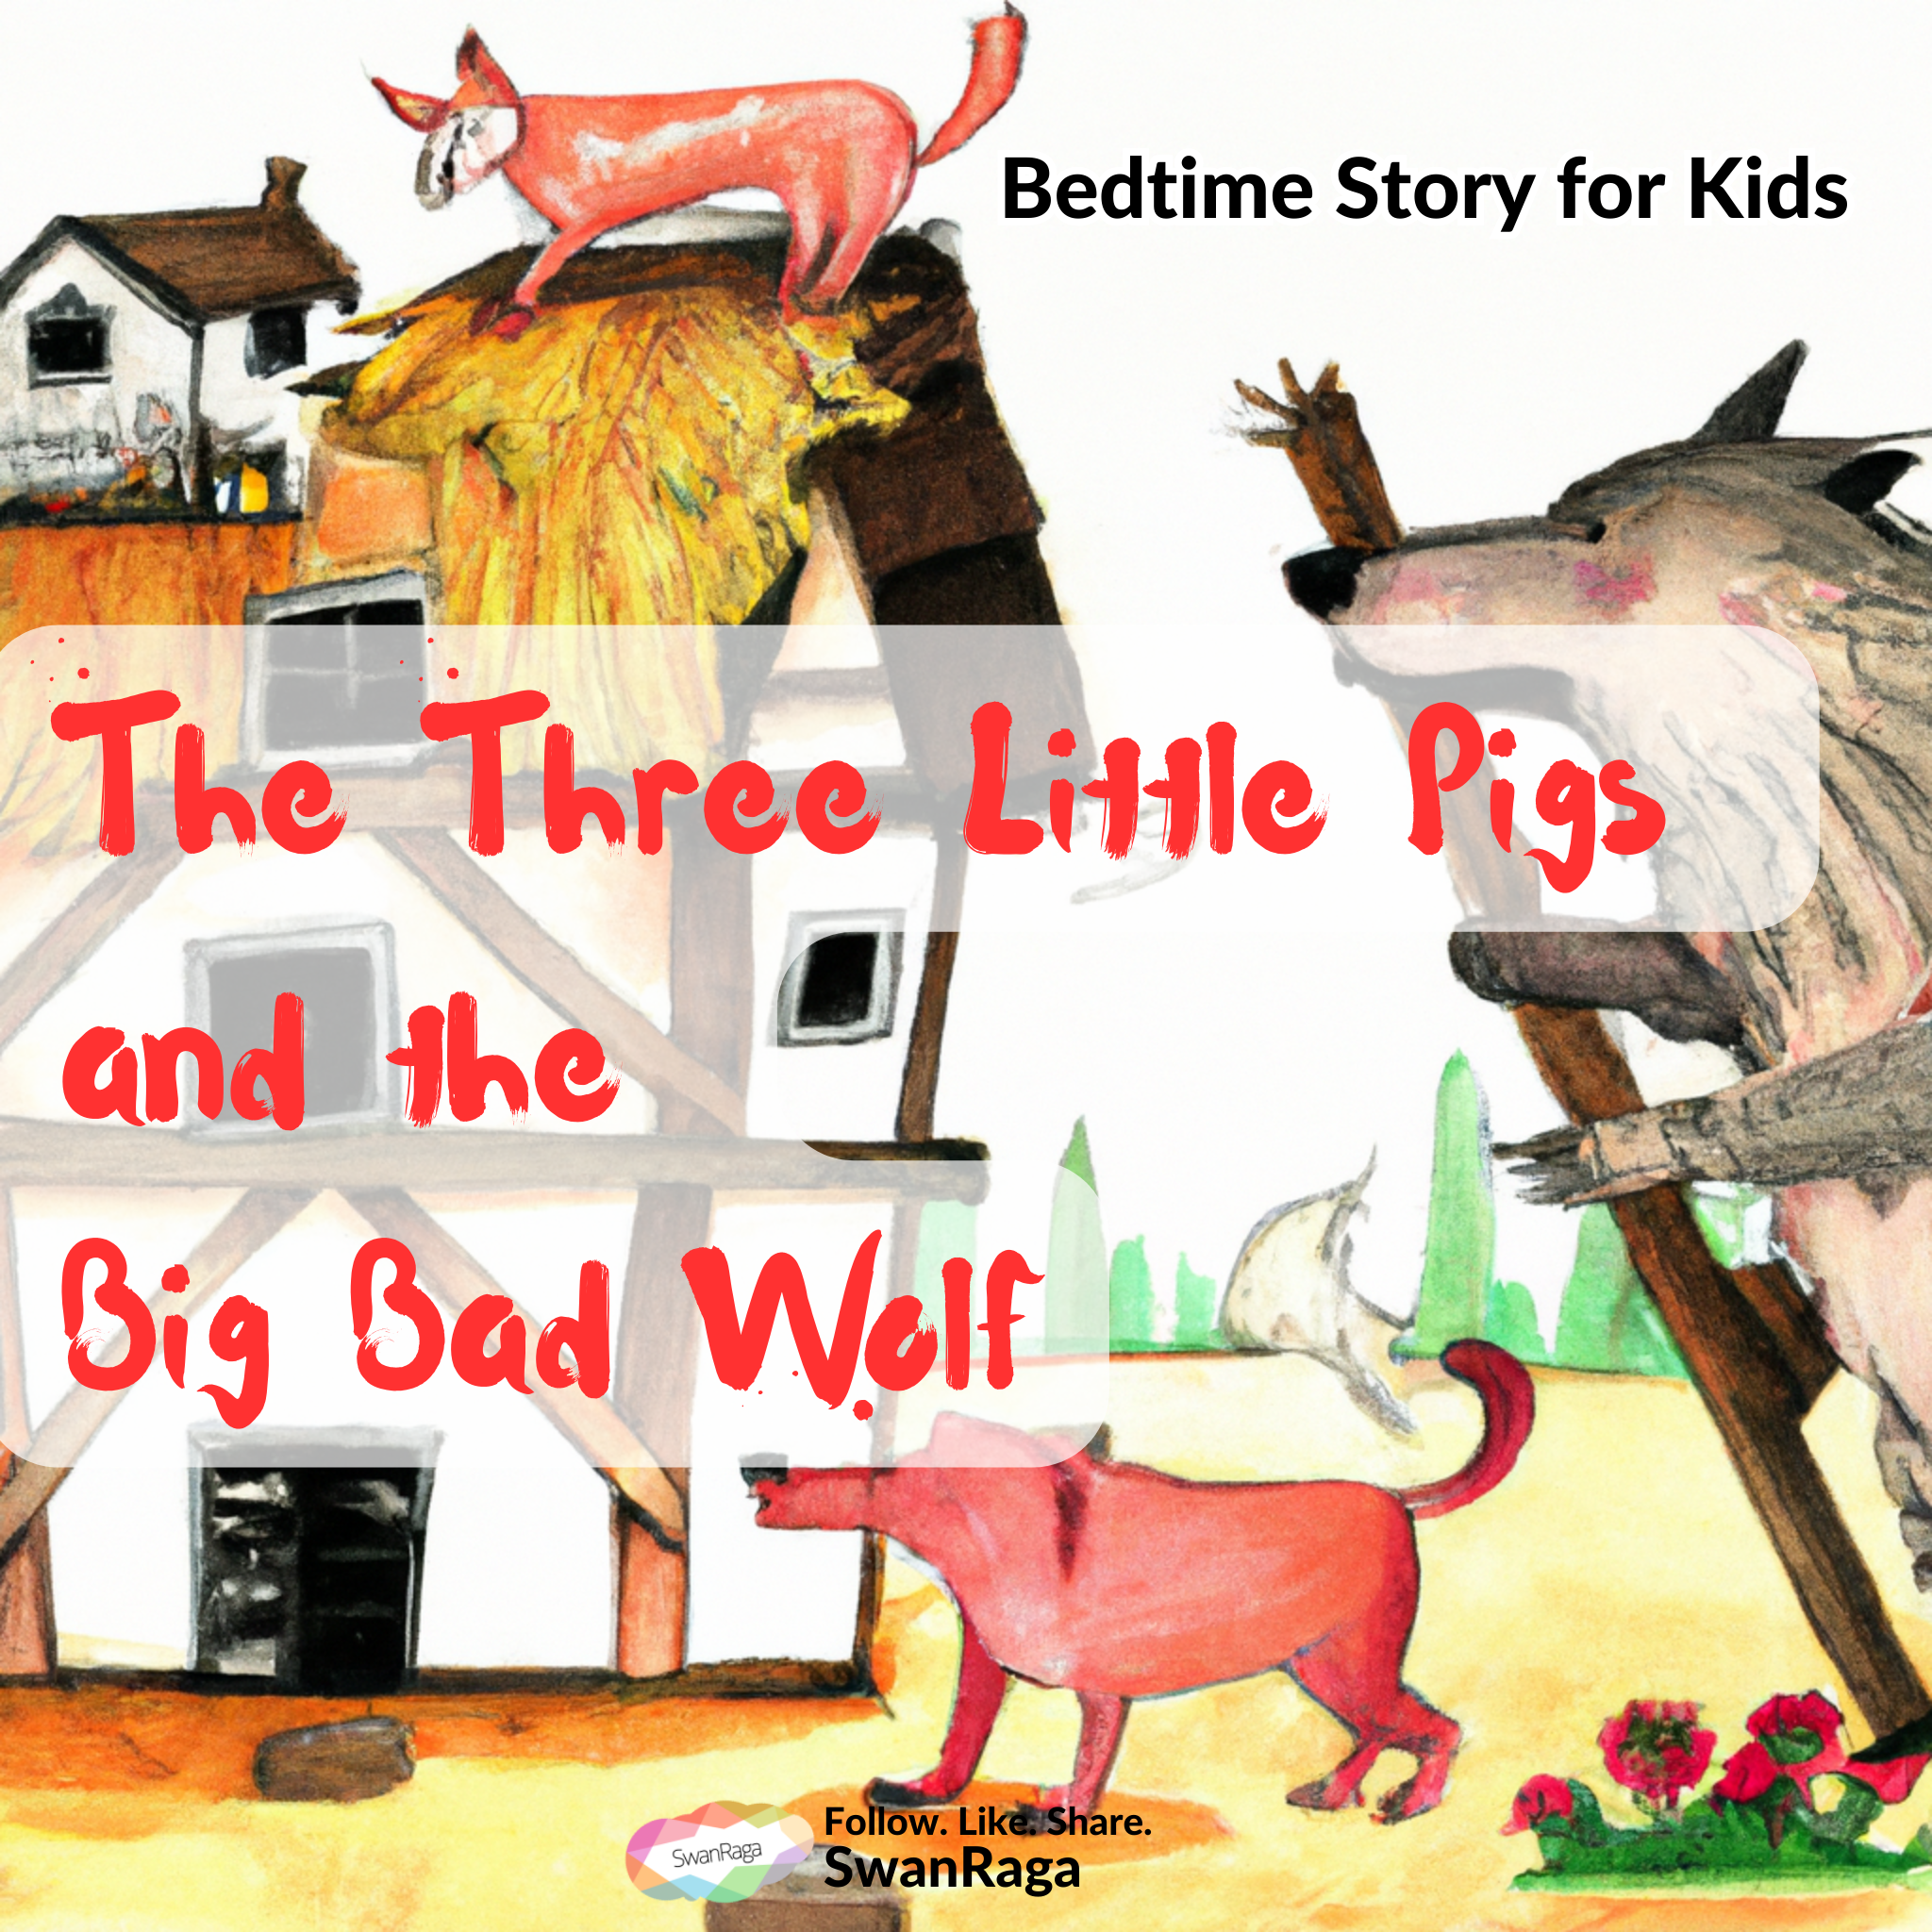 The Three Little Pigs and the Big Bad Wolf – Bedtime Story for kids